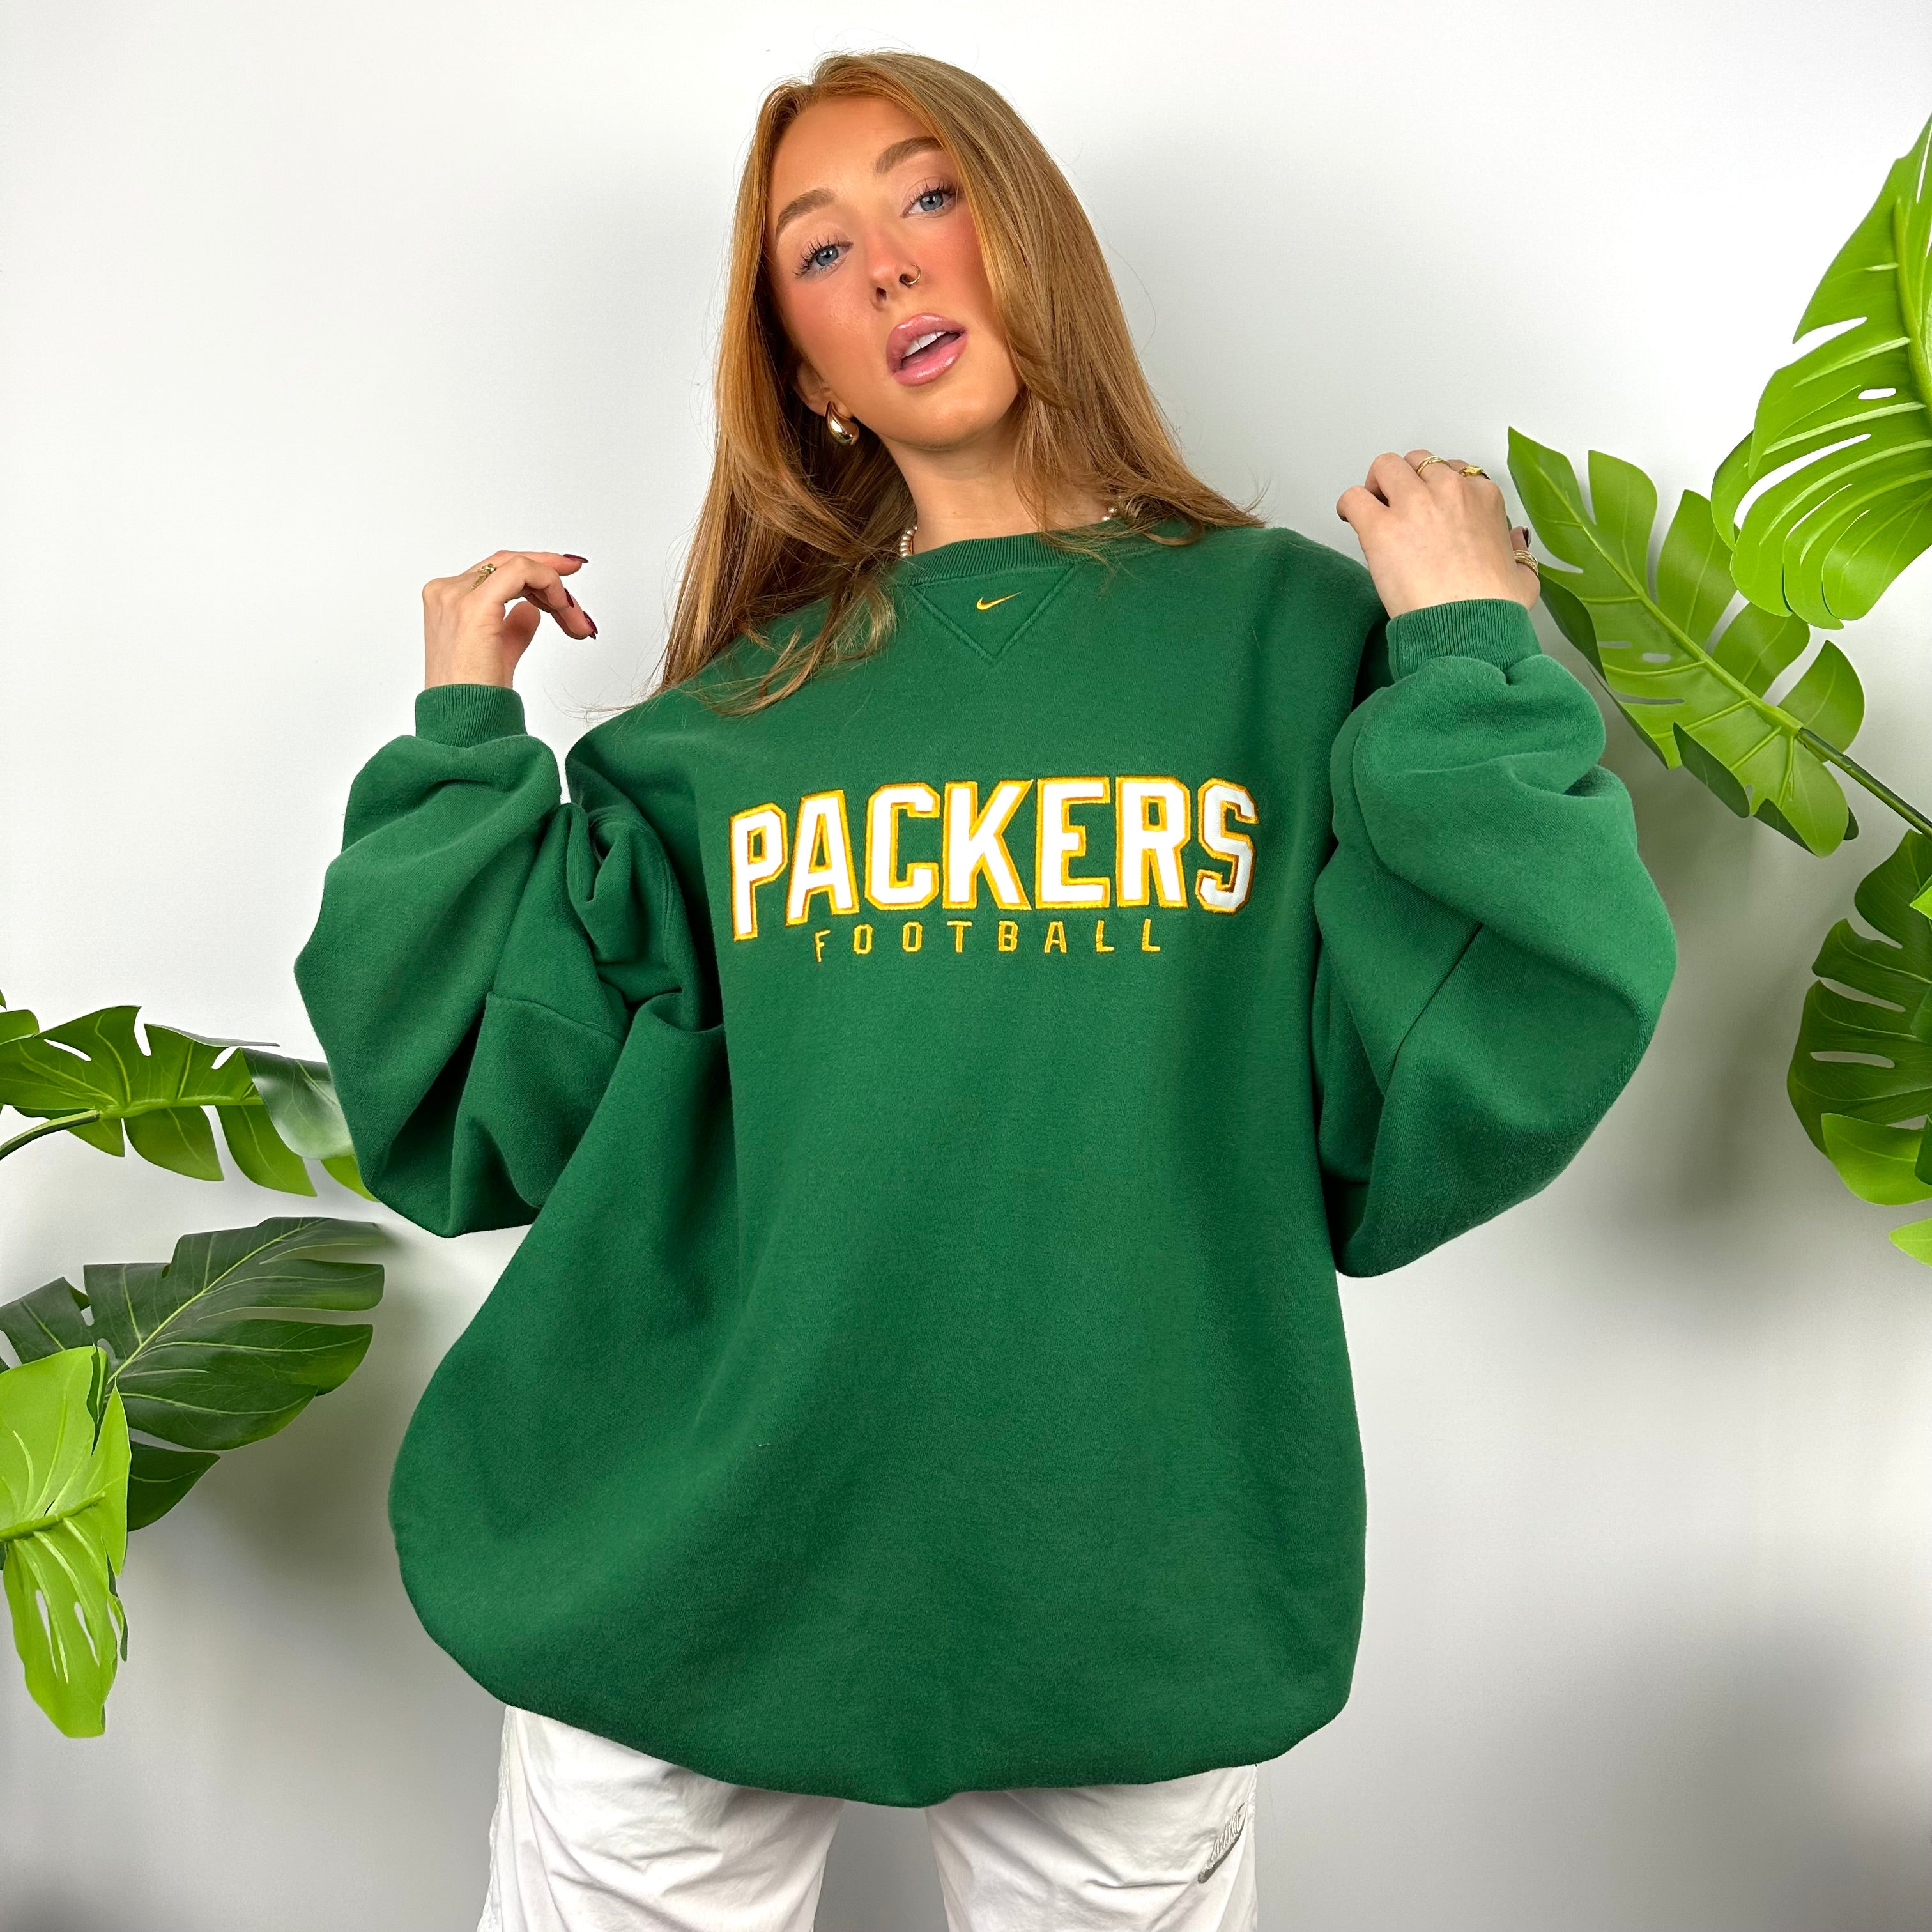 Nike x Green Bay Packers Green Embroidered Spell Out Sweatshirt (XXL)